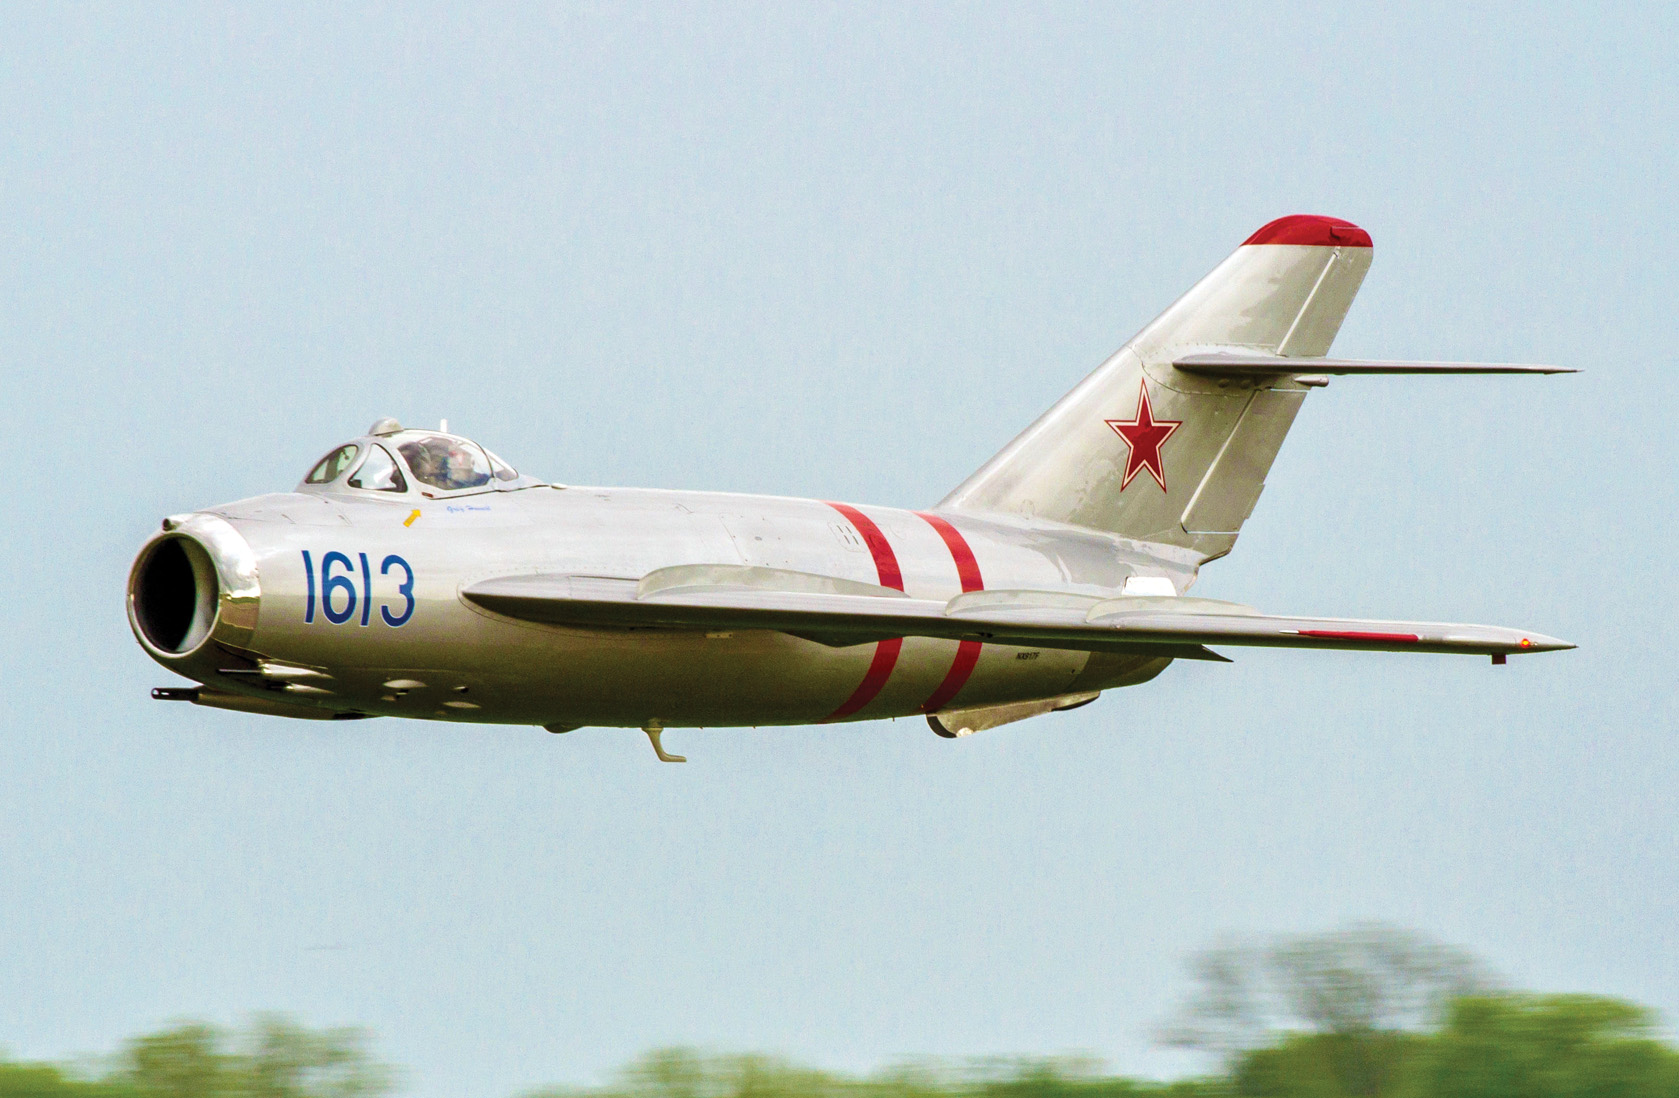 MiG-17s saw heavy action against U.S. aircraft during Operation Linebacker in 1972. North Vietnam’s comprehensive air defense system, which also included powerful surface-to-air missiles from the Soviet Union, took a heavy toll on U.S. attack aircraft. 